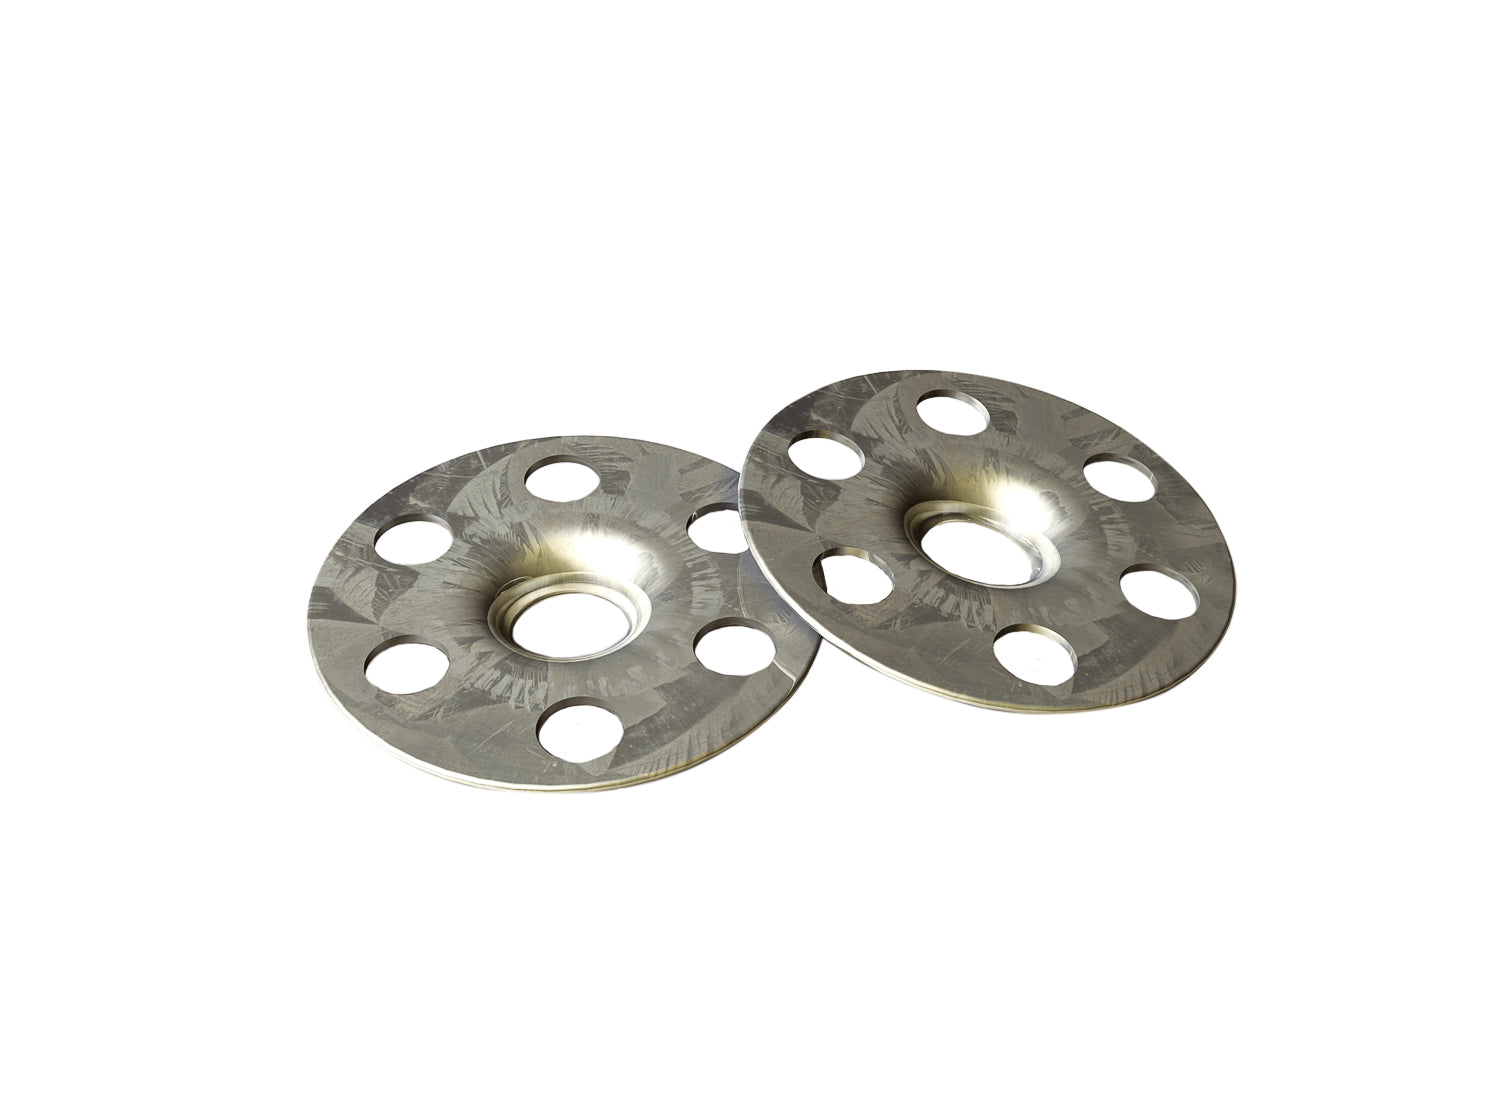 ThermoSphere Metal Washers Pk100